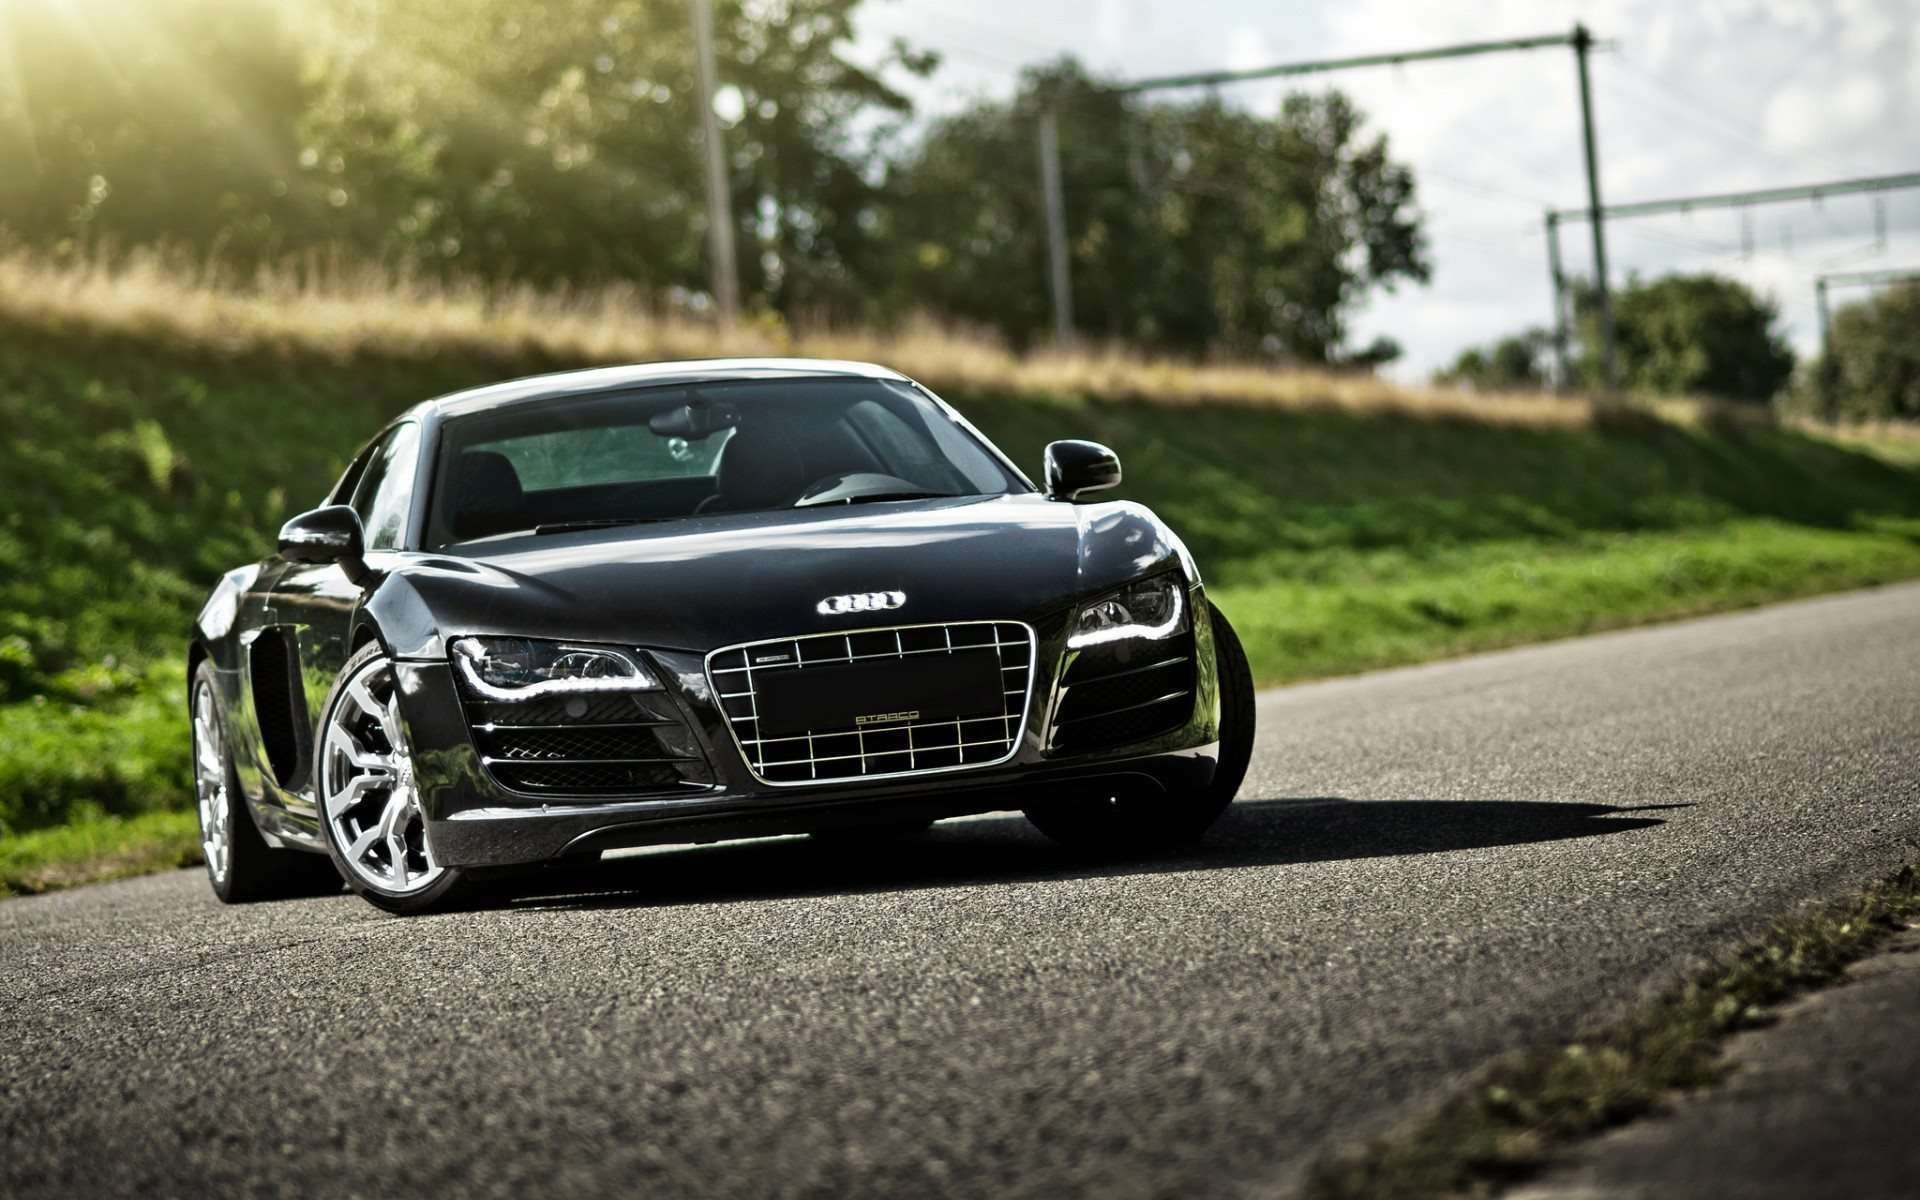 1920x1200 0 Audi R8 Wallpapers HD Download Audi R8 Wallpapers HD Group